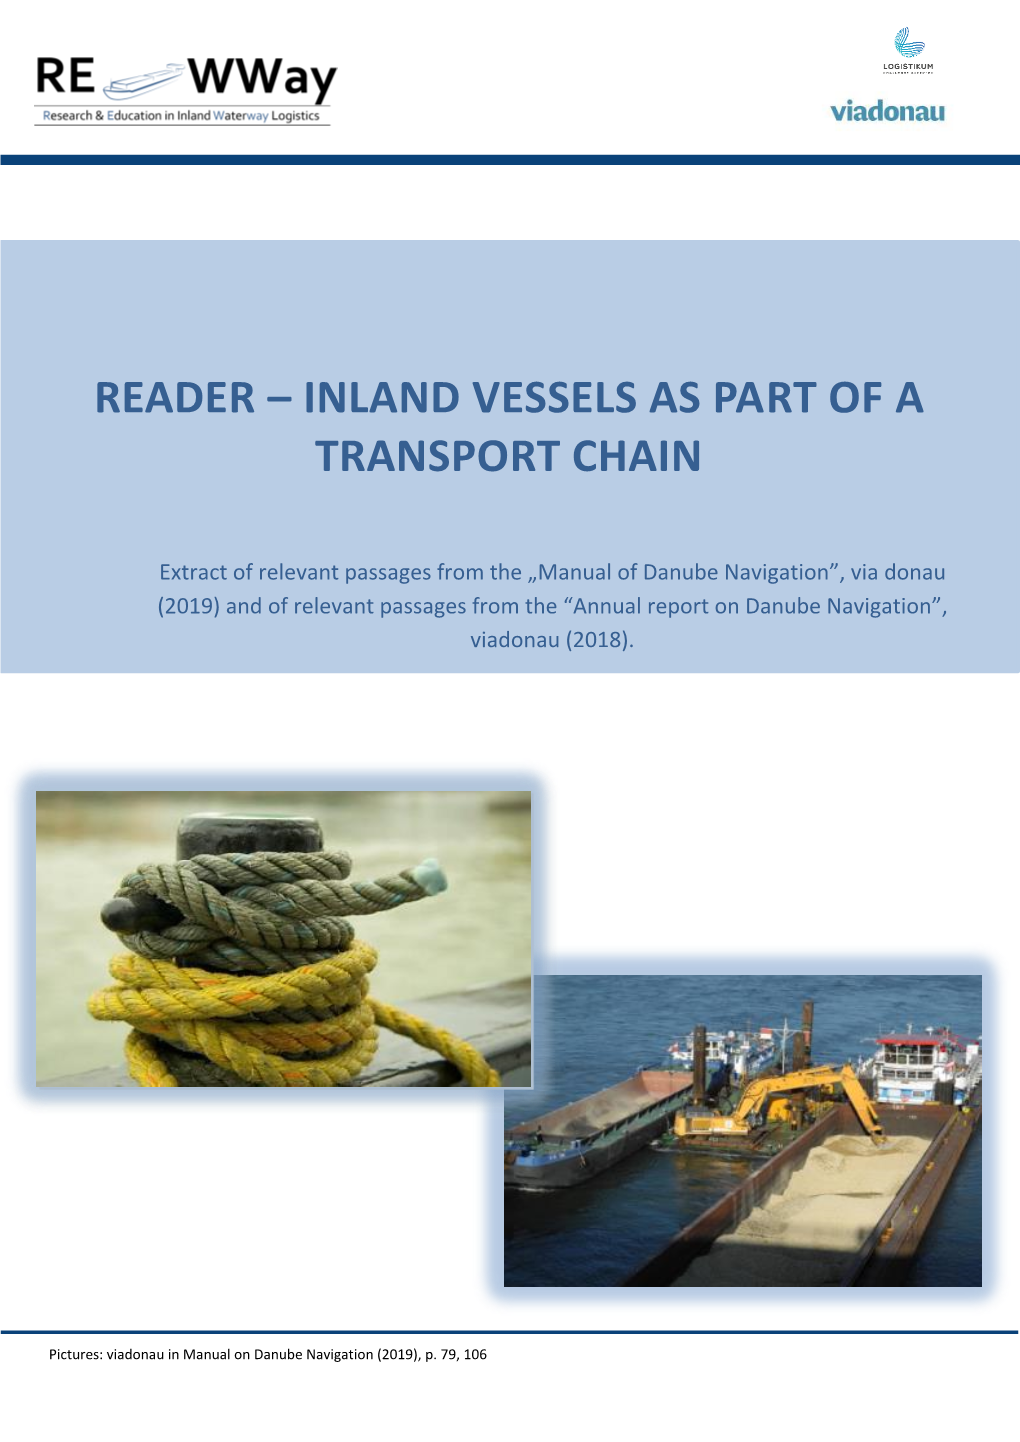 Reader – Inland Vessels As Part of a Transport Chain